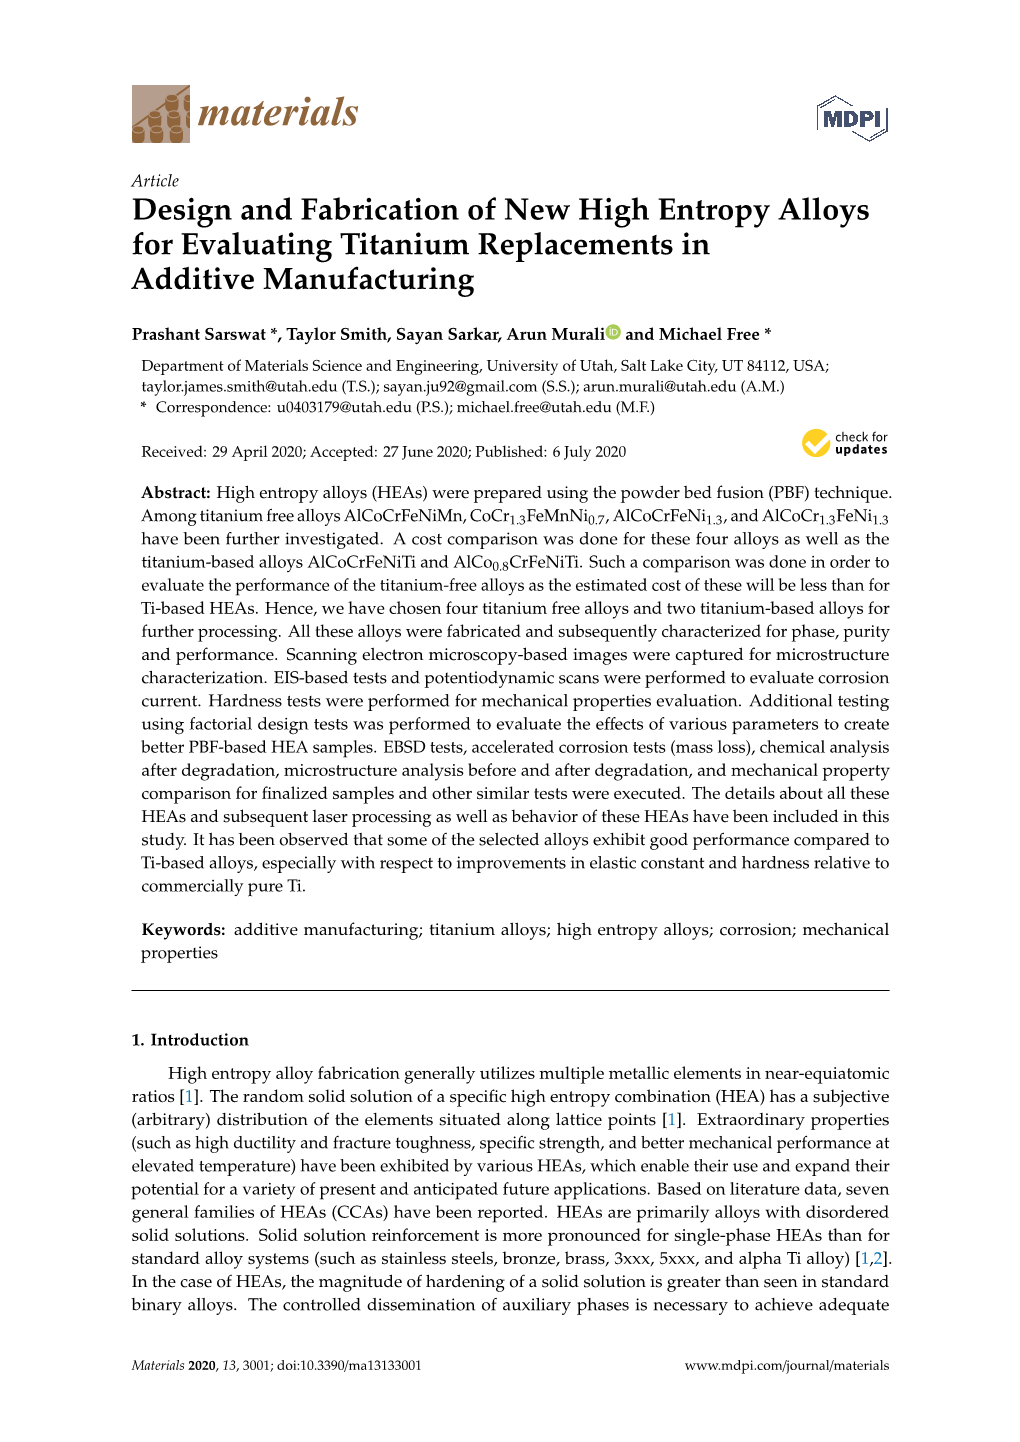 Design and Fabrication of New High Entropy Alloys for Evaluating Titanium Replacements in Additive Manufacturing